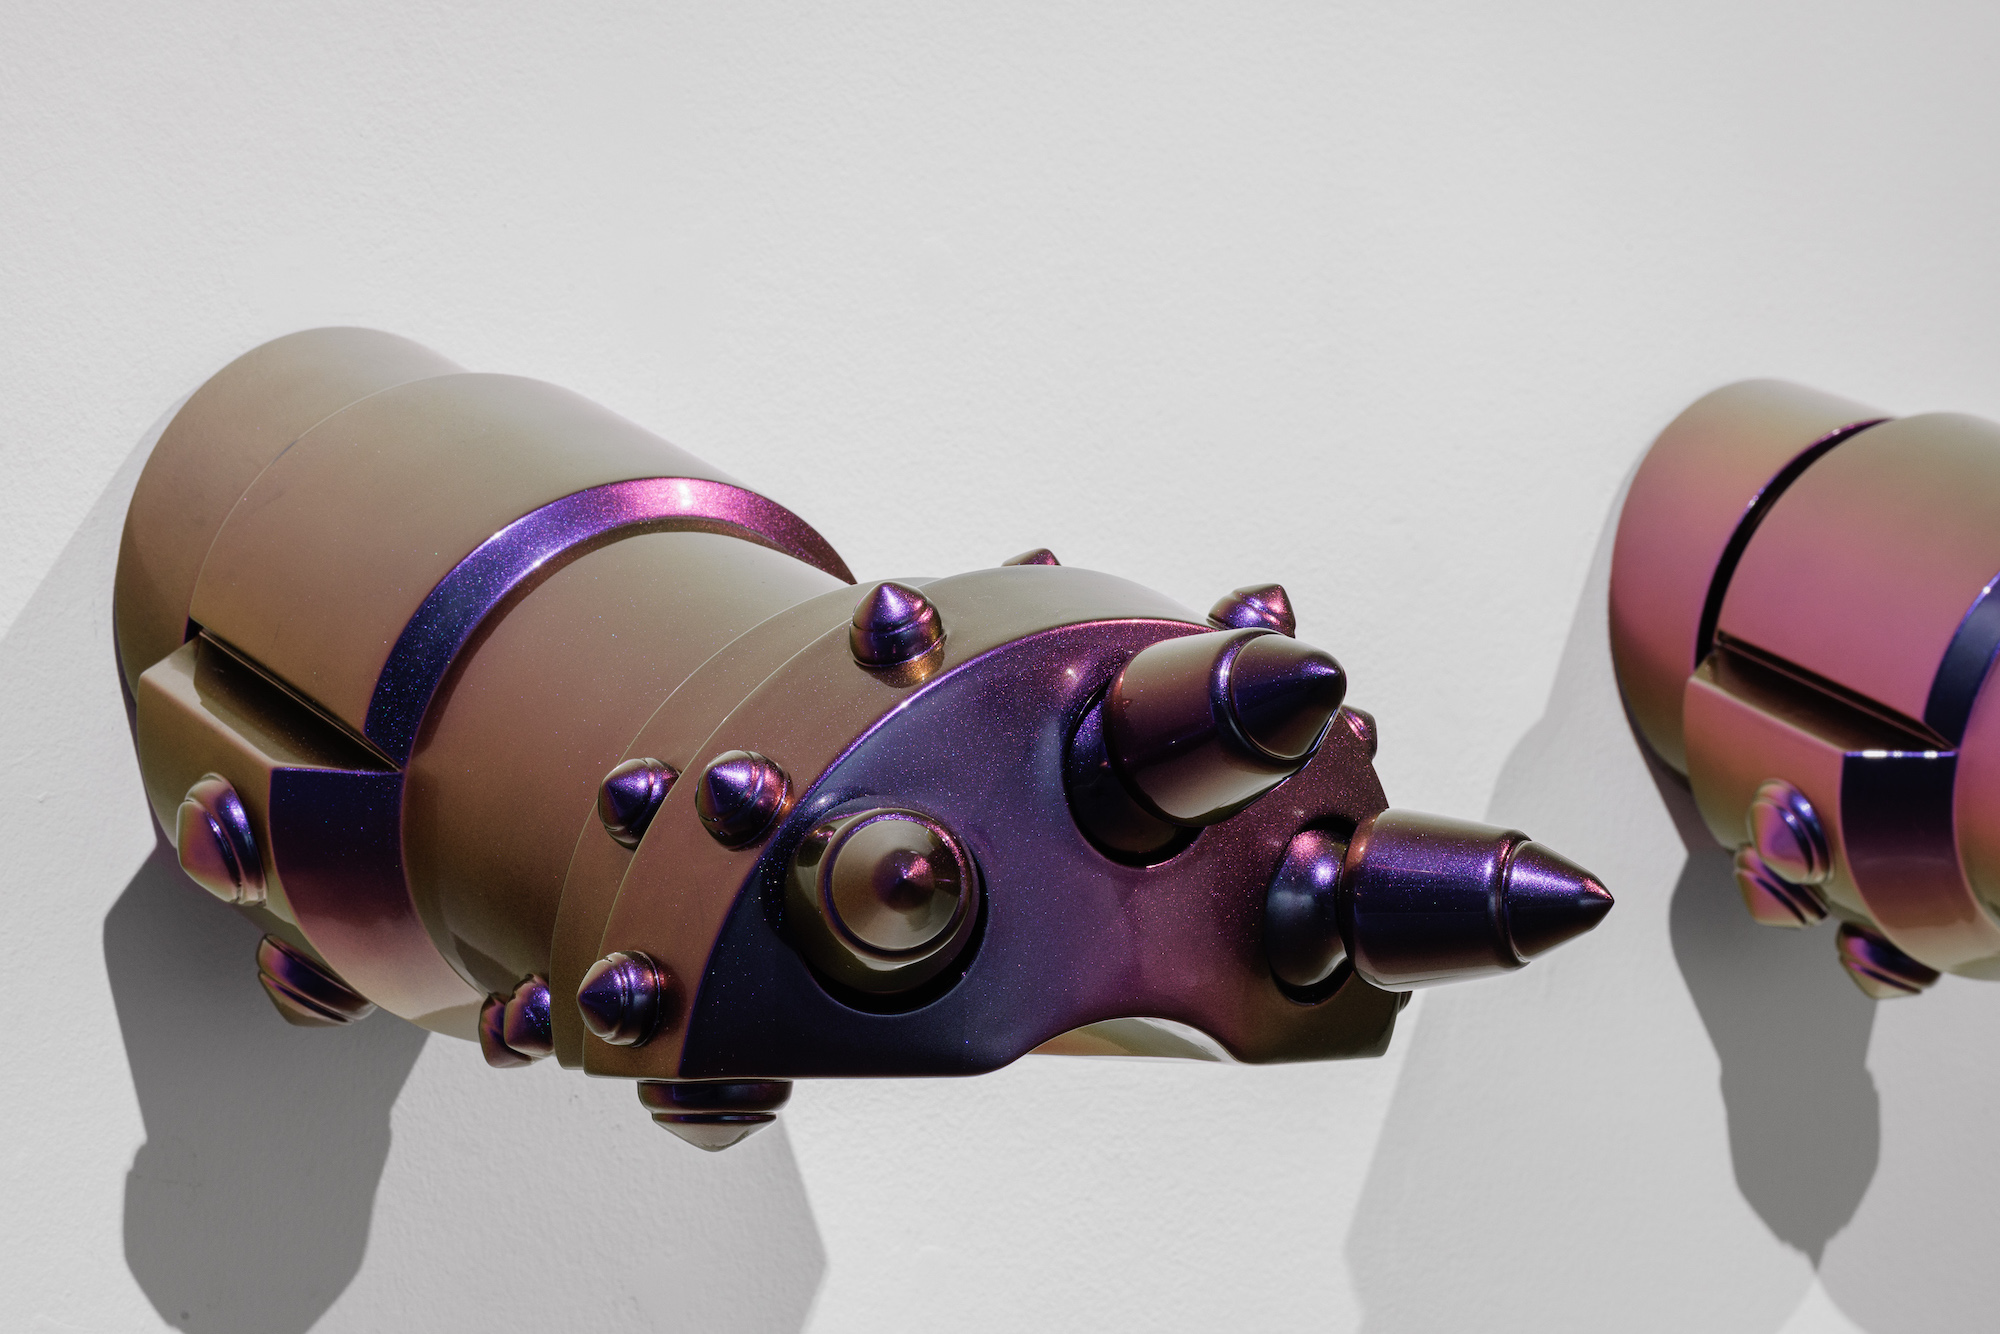 A close-up of an opalescent sculpture, shiny purple gauntlets formed from a composite of geometric structures and drill bits used for extracting petroleum.